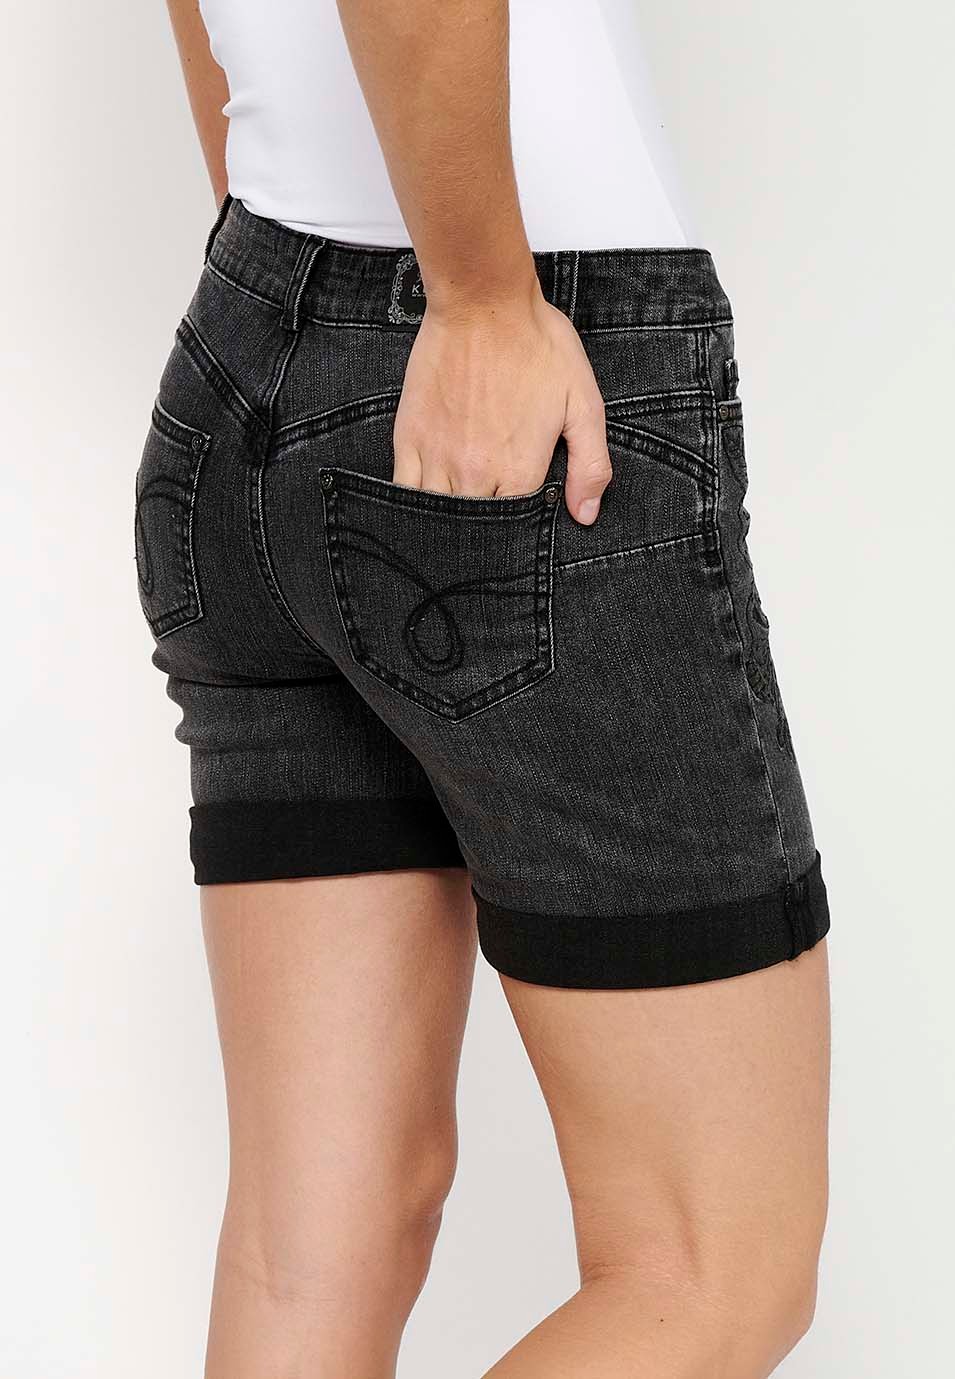 Shorts with a turn-up finish with front closure with zipper and button and floral embroidery in Black for Women 7